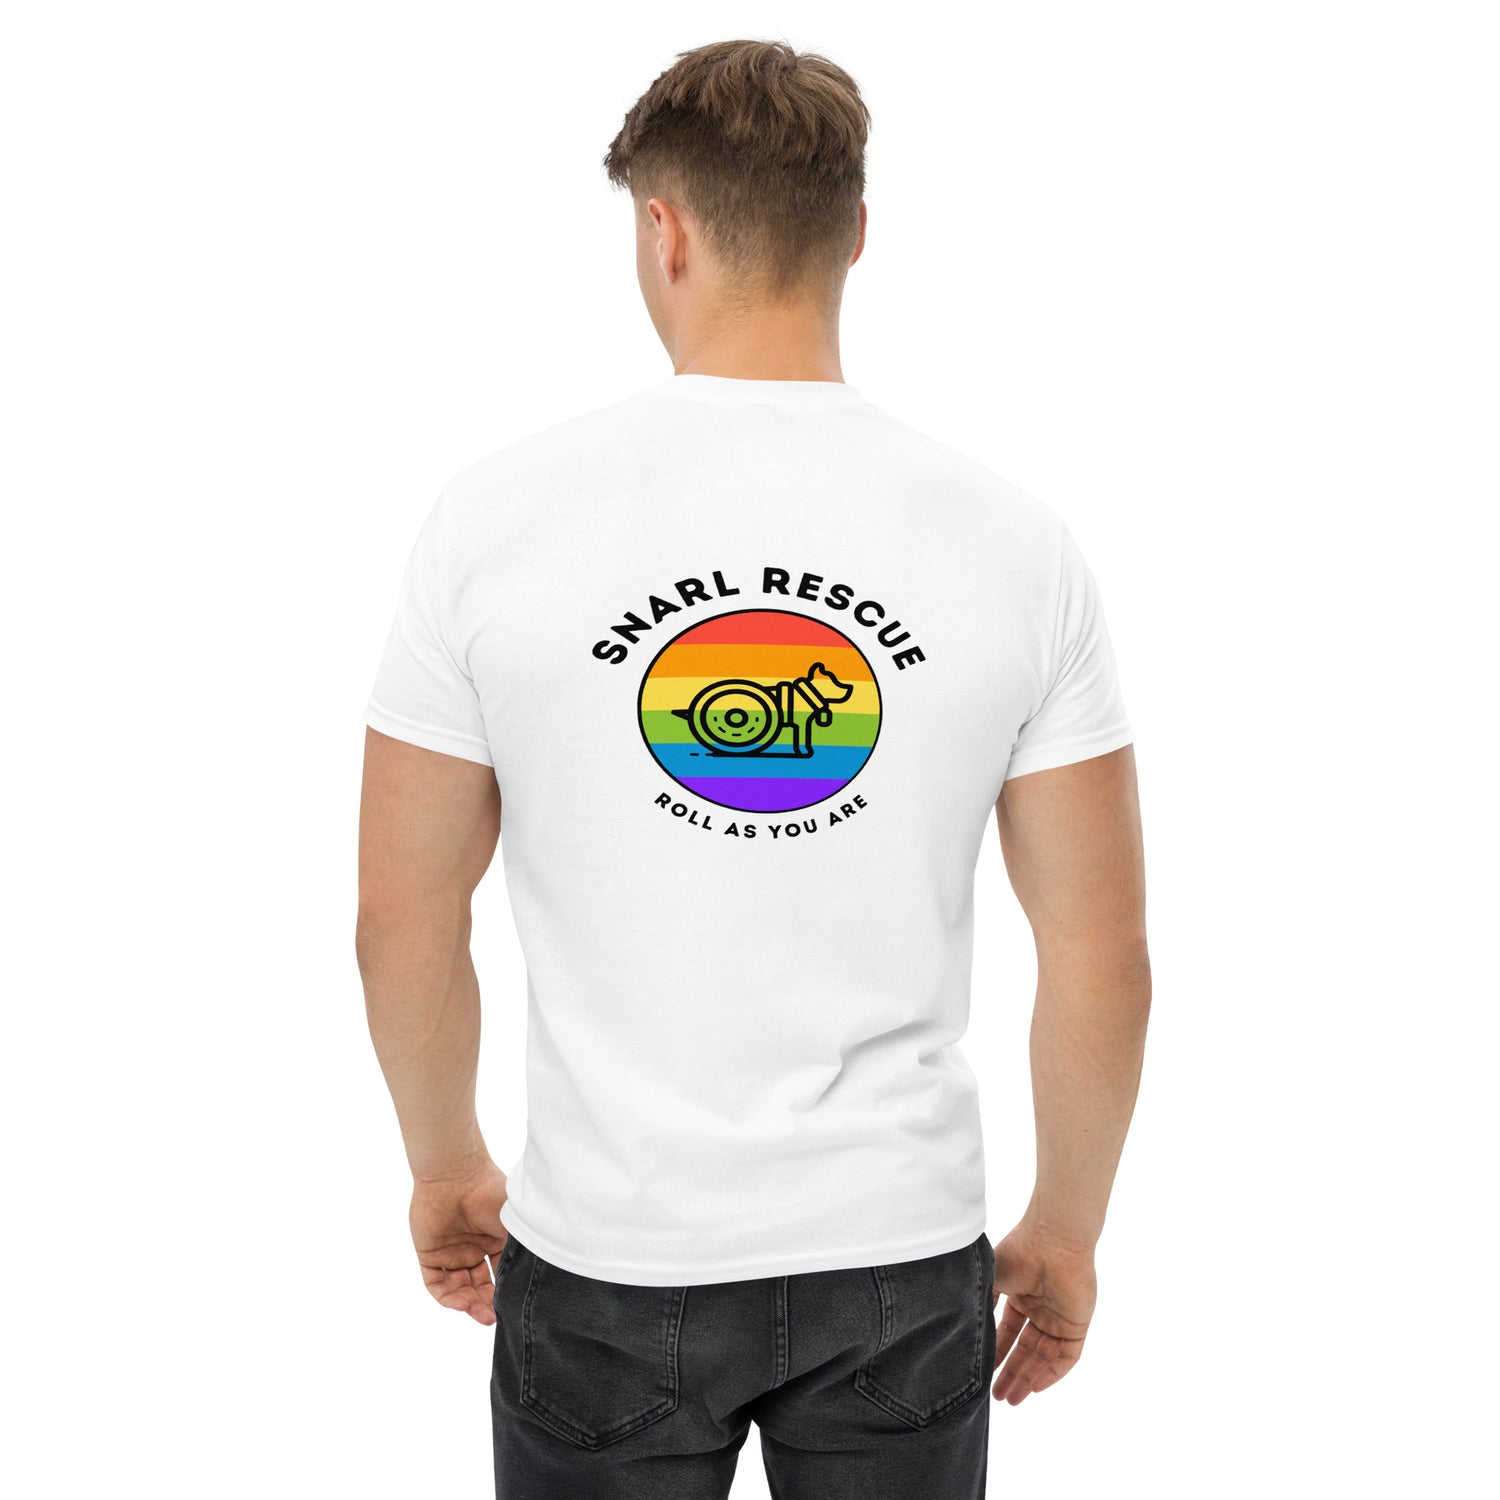 The Pride Collection